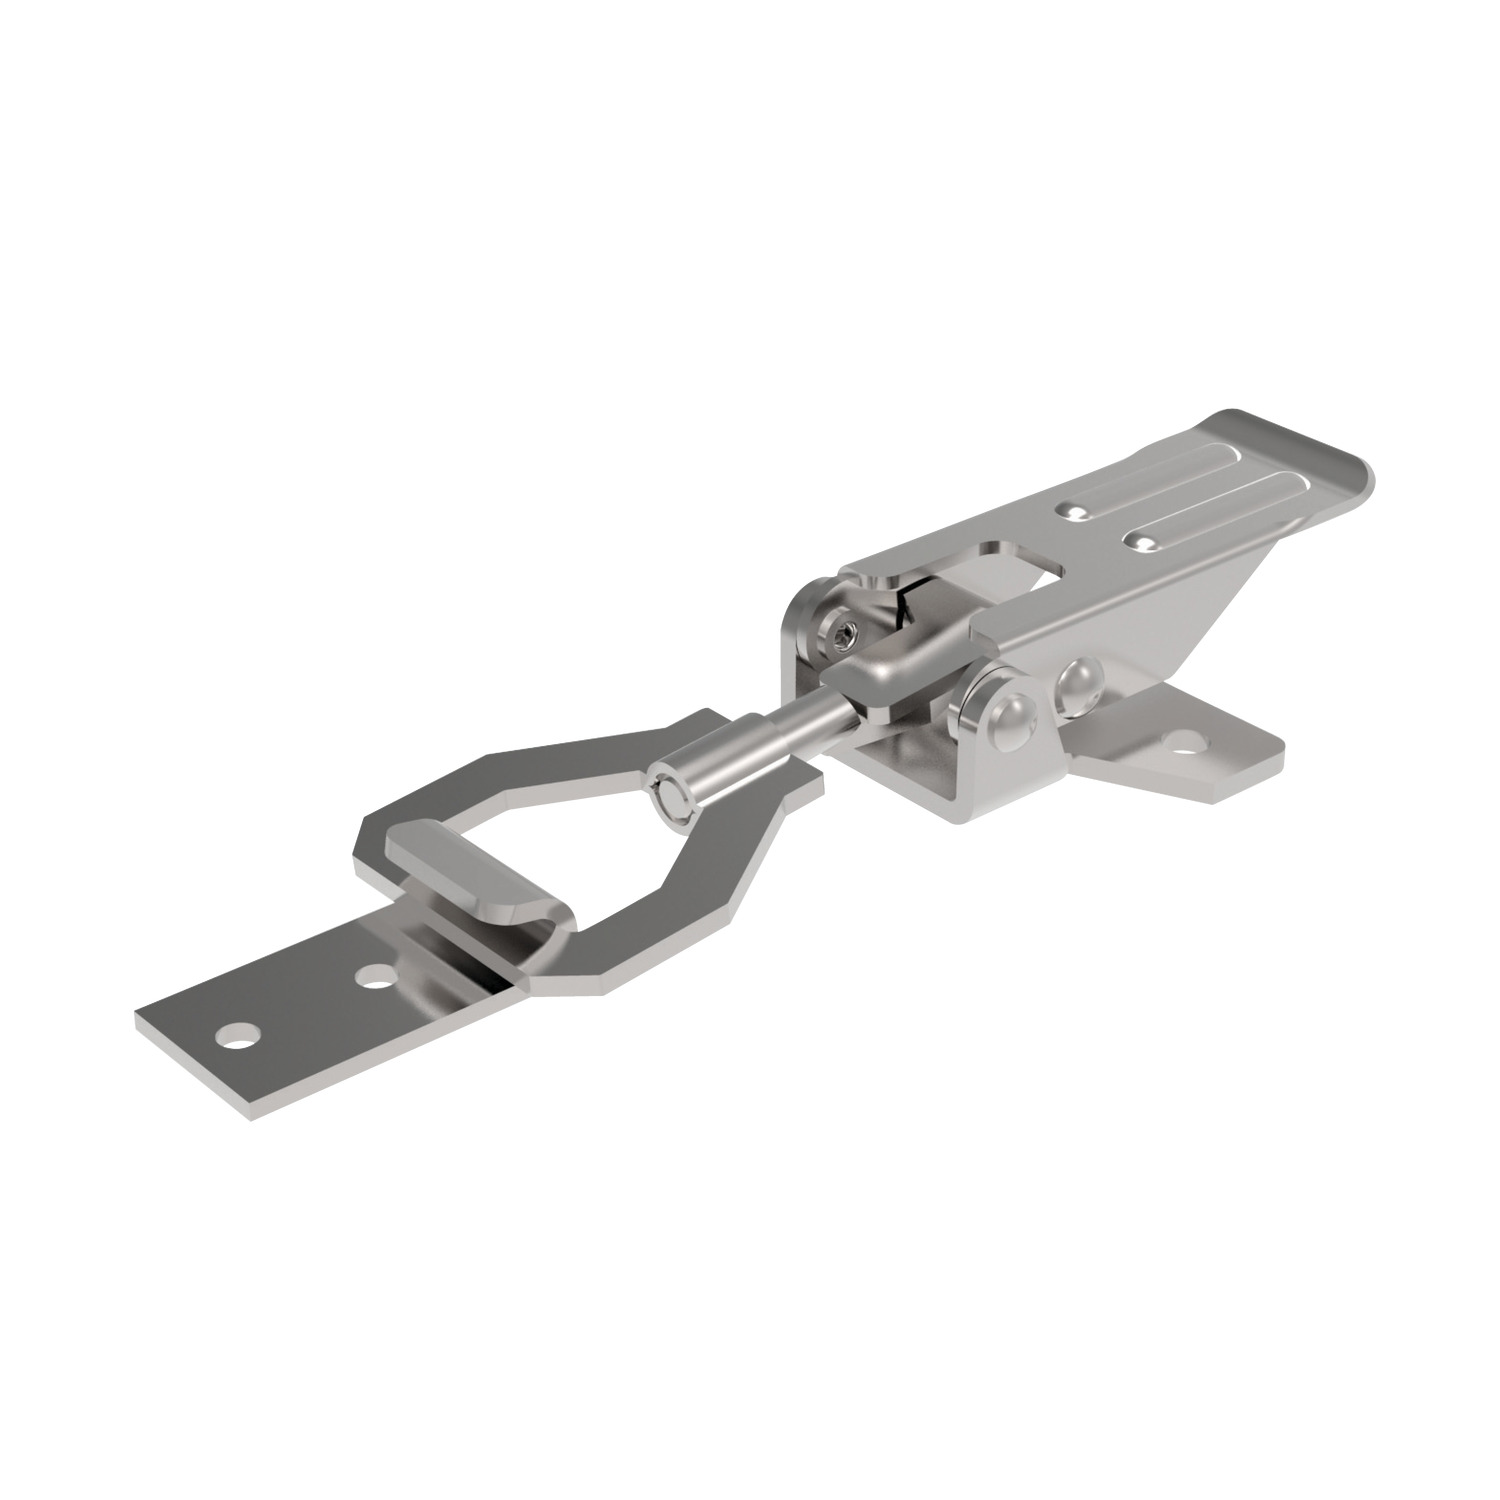 J0520.AC0004 Toggle Latches Zinc Plated Steel - 138 to 150 - 52 - 18